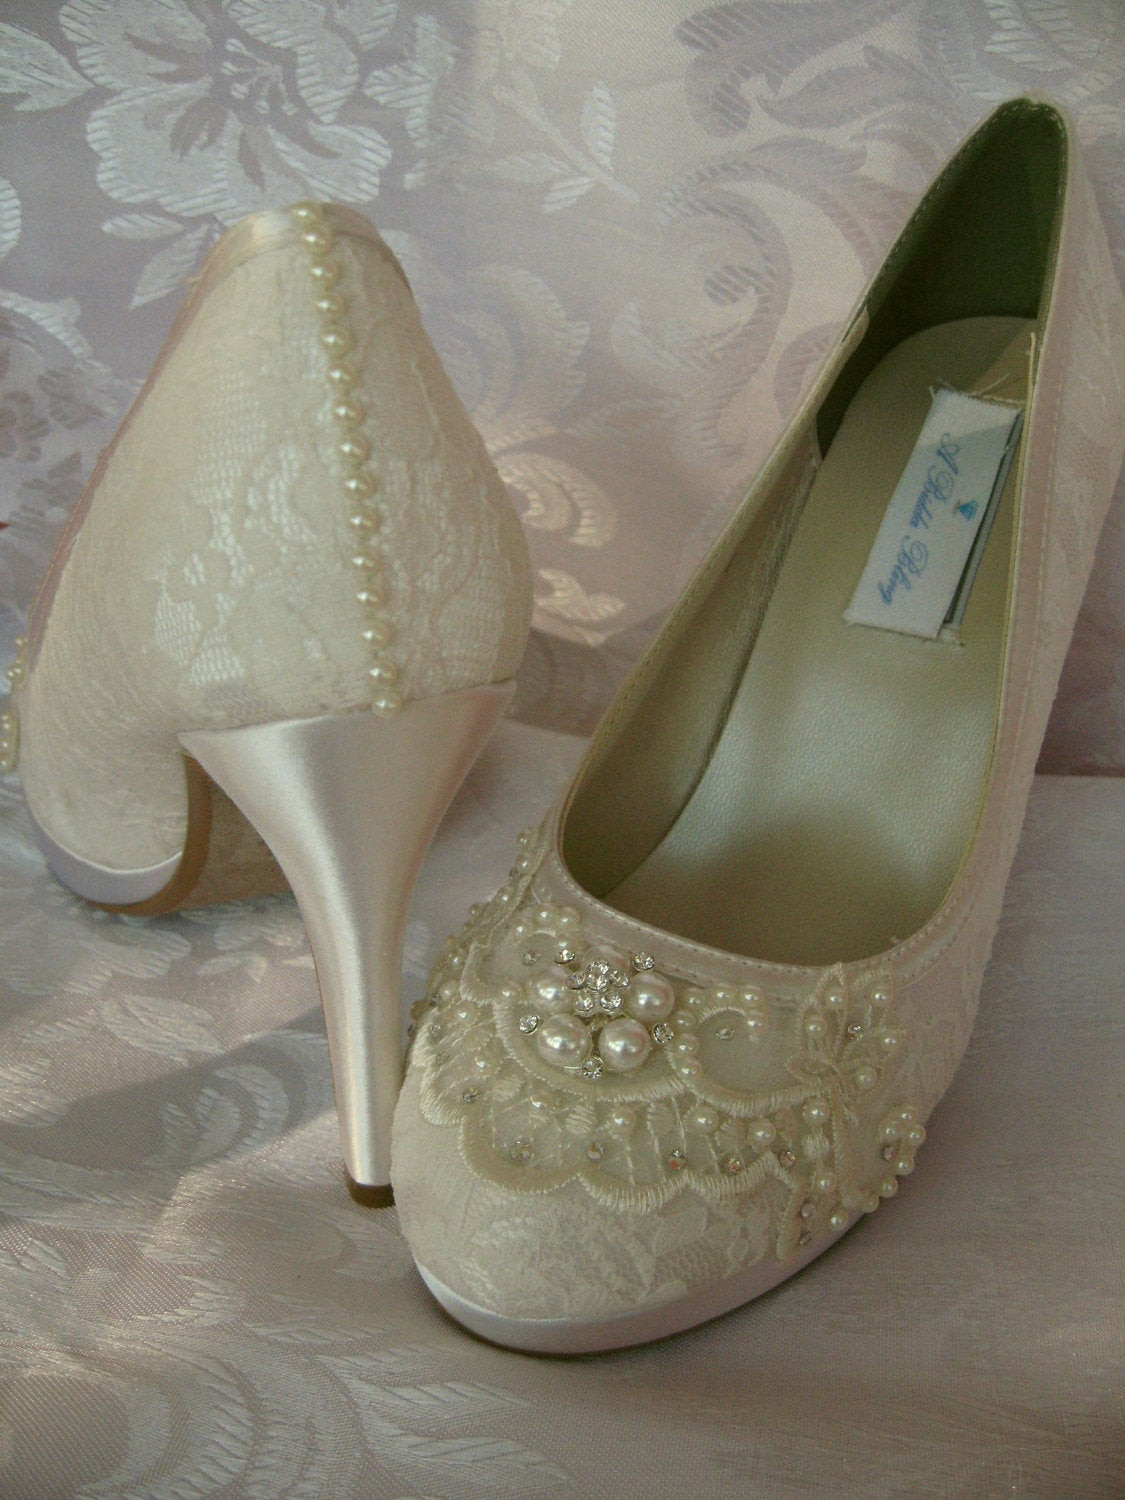 Ivory Lace Wedding Shoes
 Ivory Lace Wedding Shoes Ivory or White Bridal Shoes with Lace